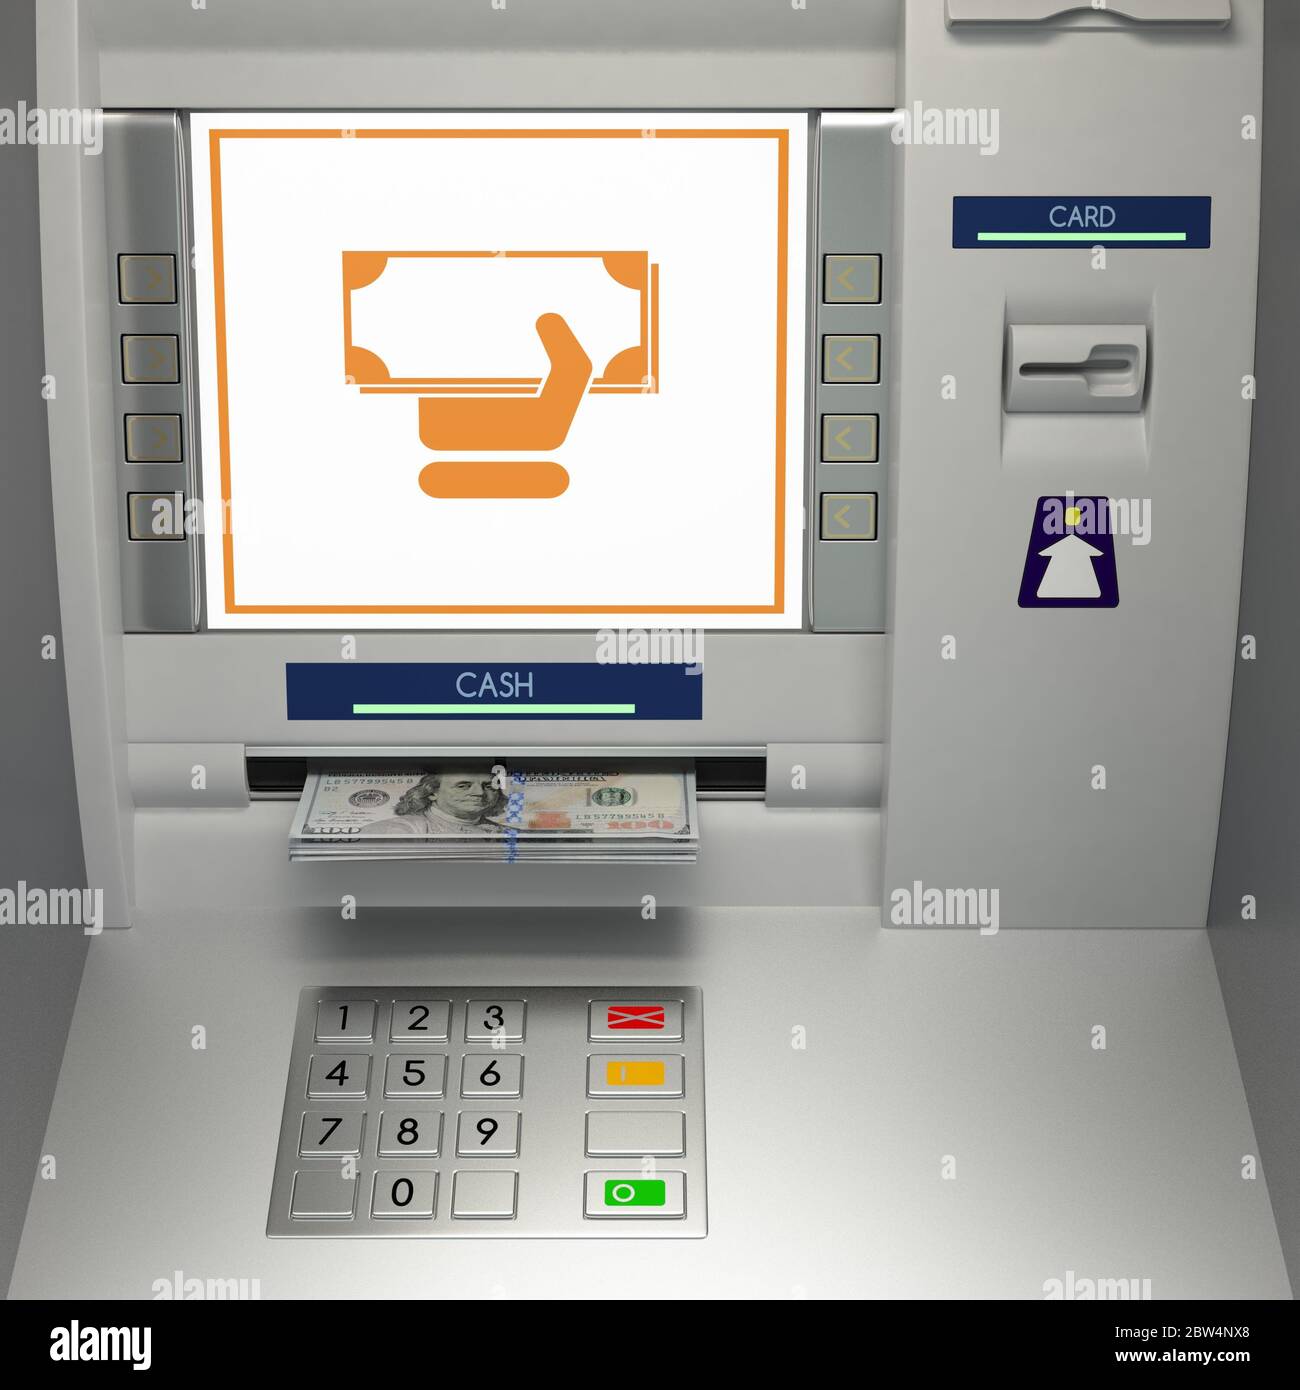 ATm machine with banknotes in the money slot Stock Photo